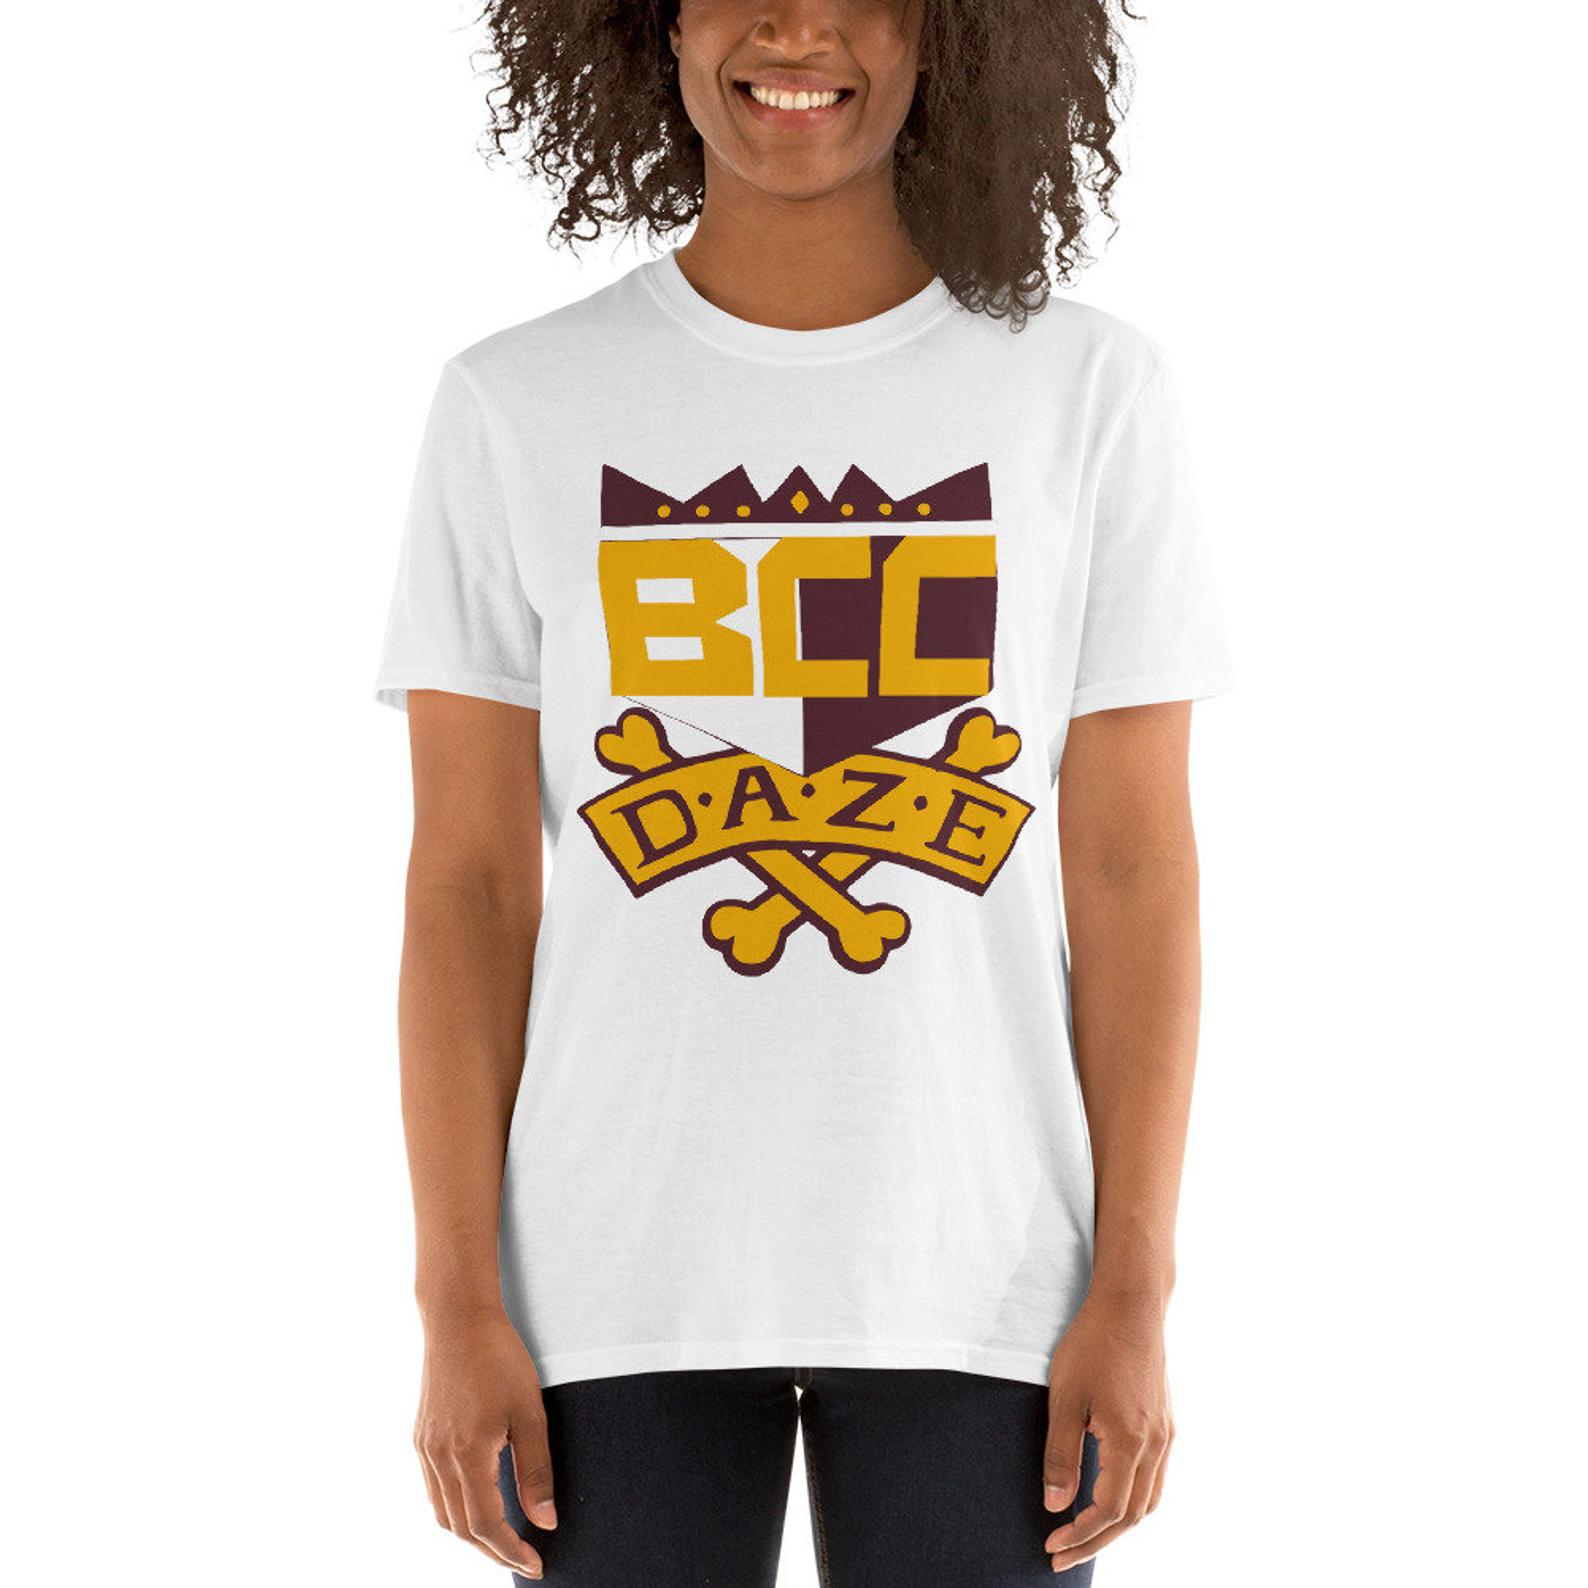 7 Items That Will Help You Show Your Bethune-Cookman University Pride In Time For Homecoming